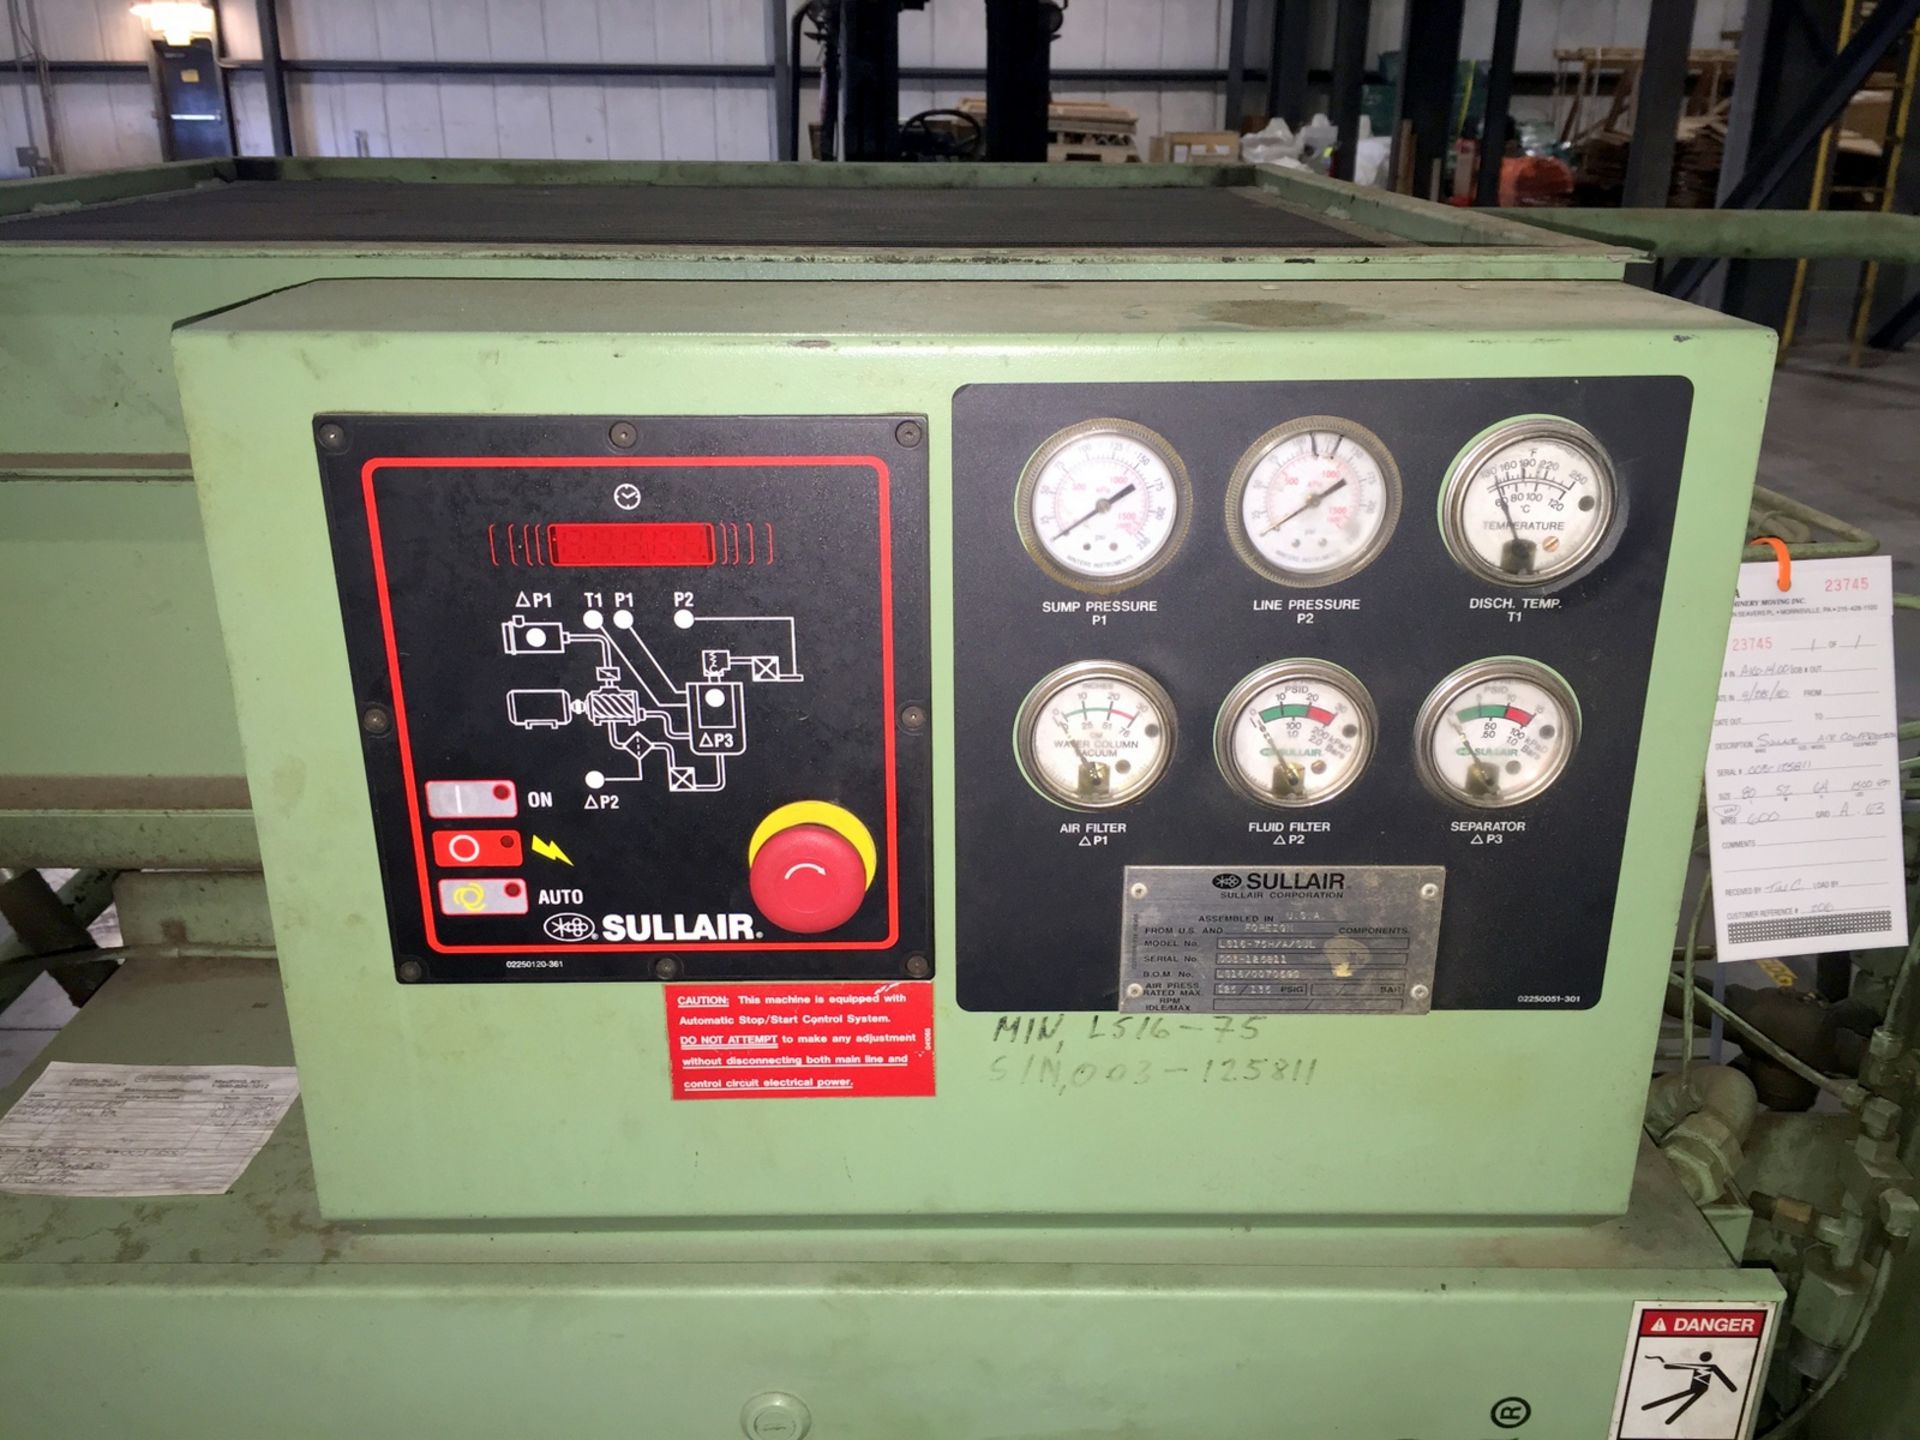 Sullair Mdl. LS-16-17H/A/SUL Rotary Screw Compressor, Capacity 326 ACFM, Full Load Pressure 125 - Image 5 of 8